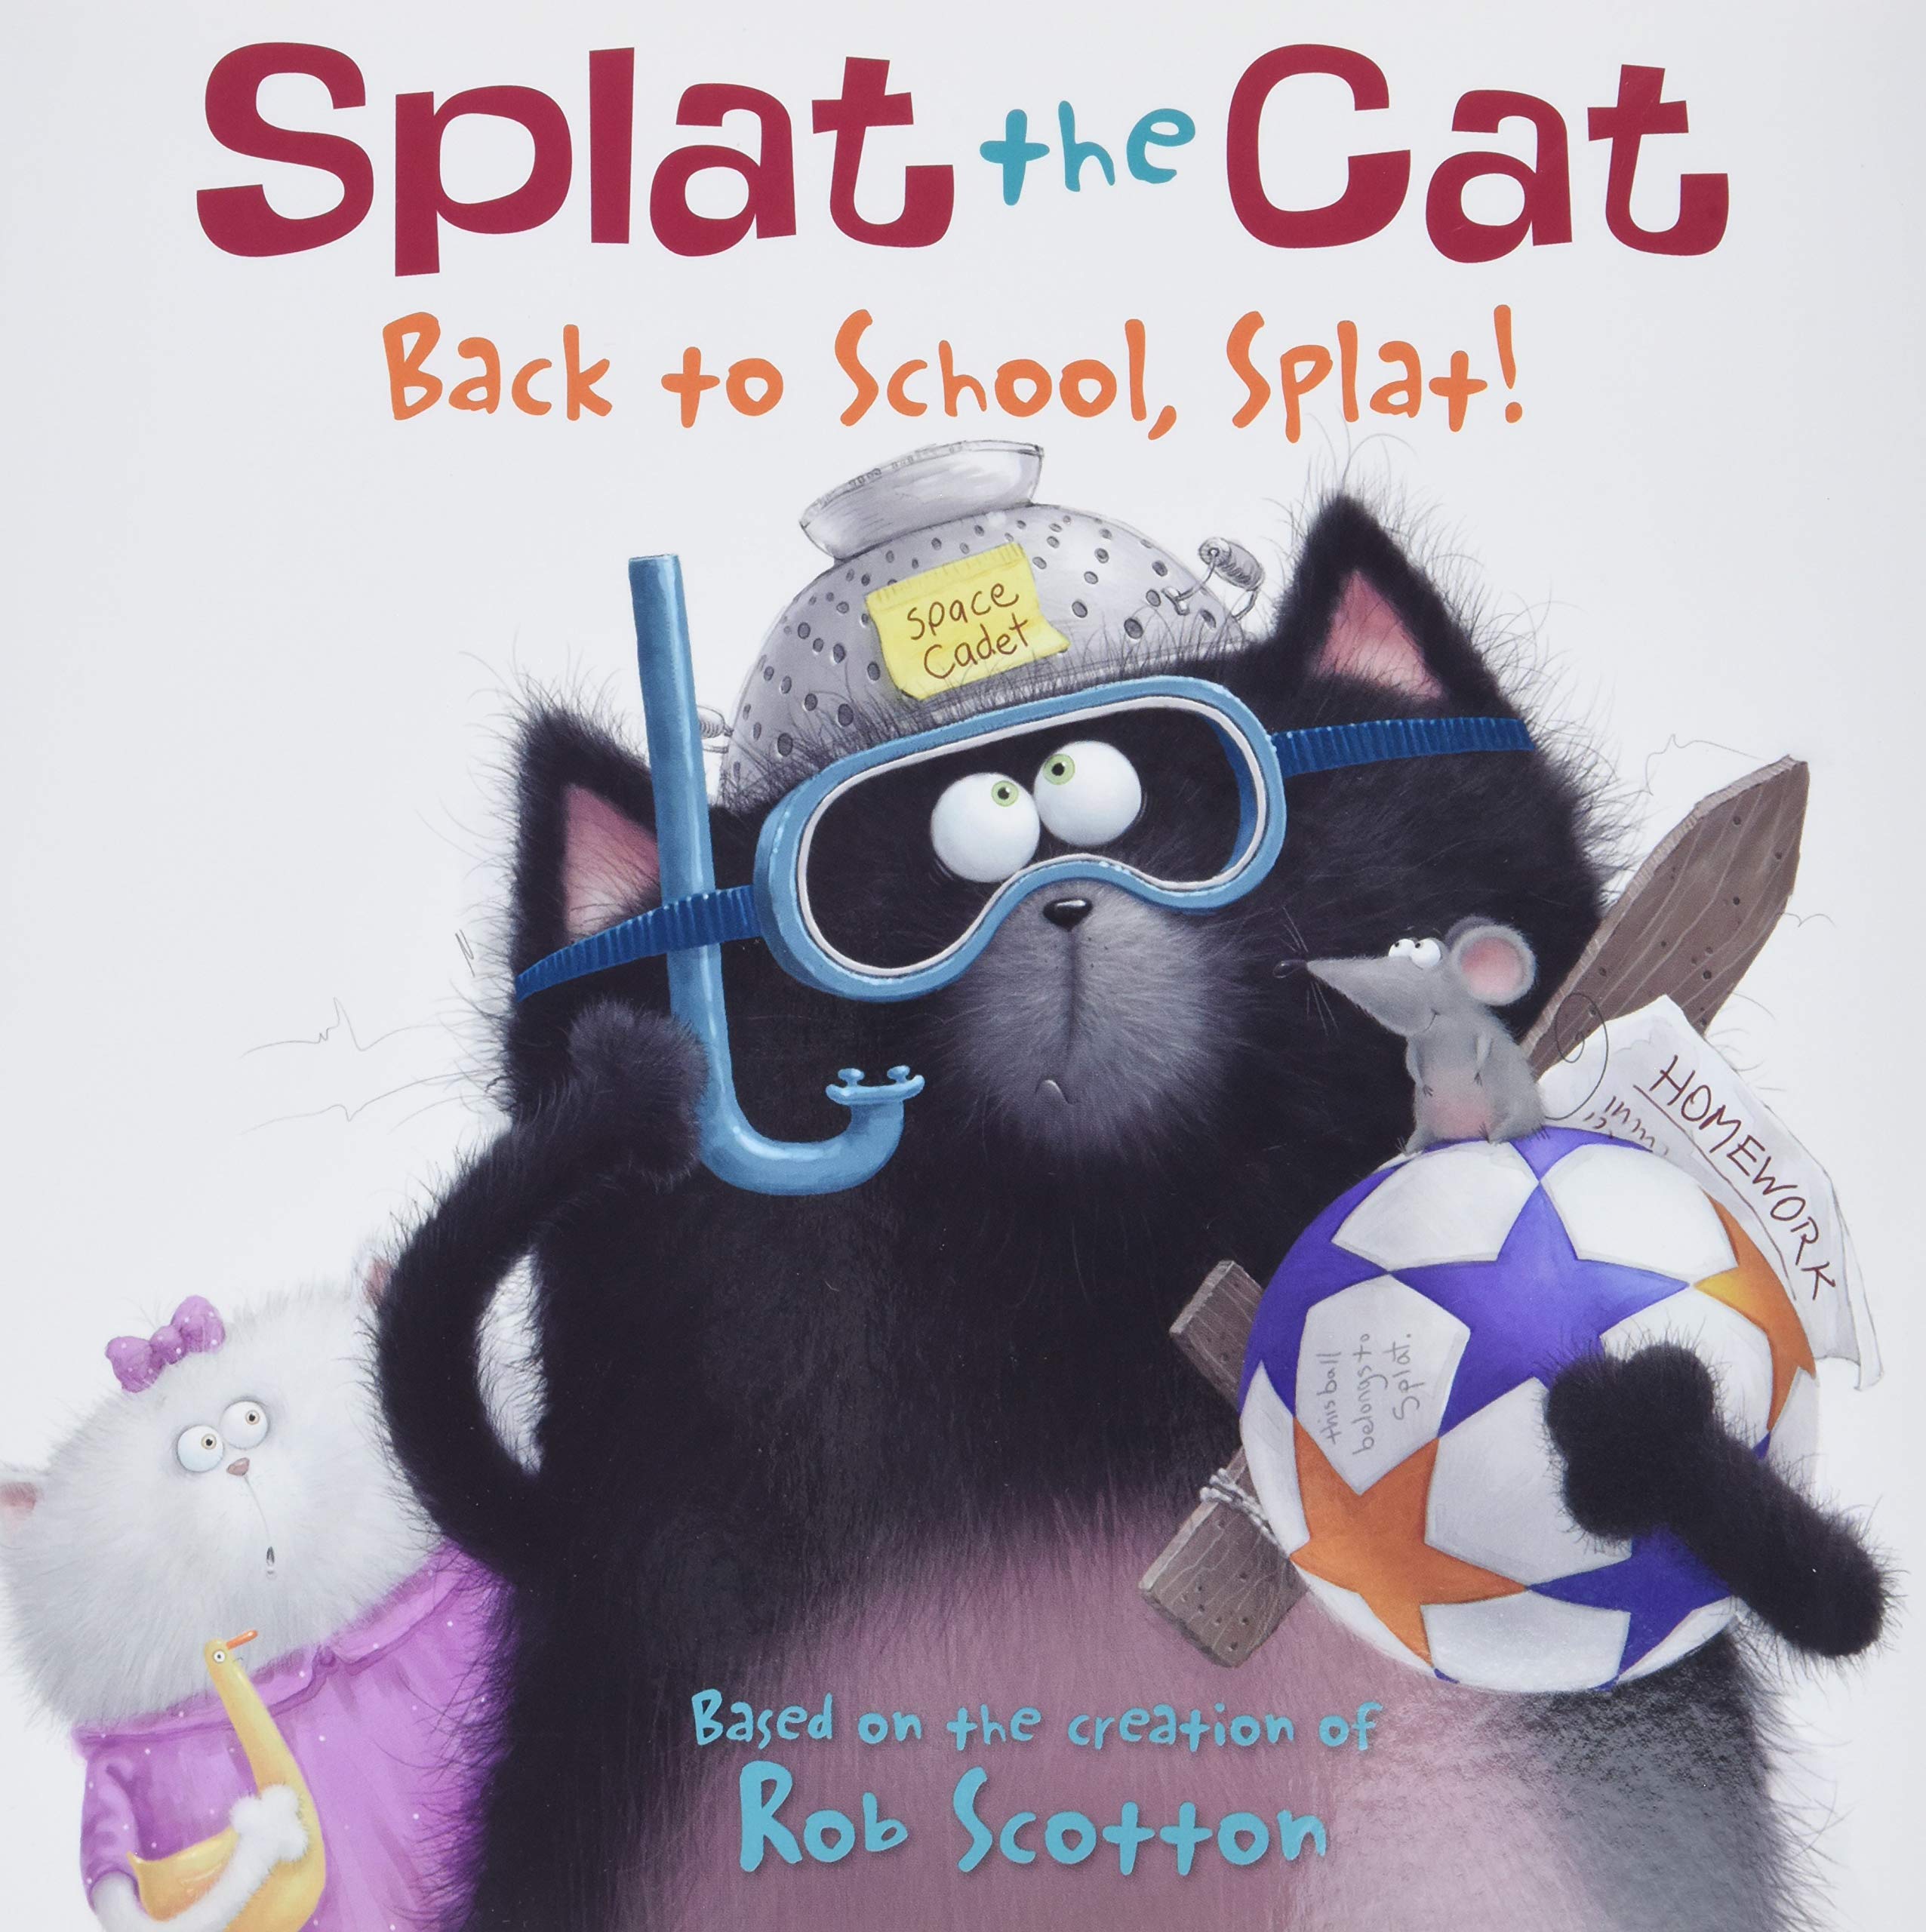 speech and language teaching concepts for Splat the Cat Back to School Splat in speech therapy​